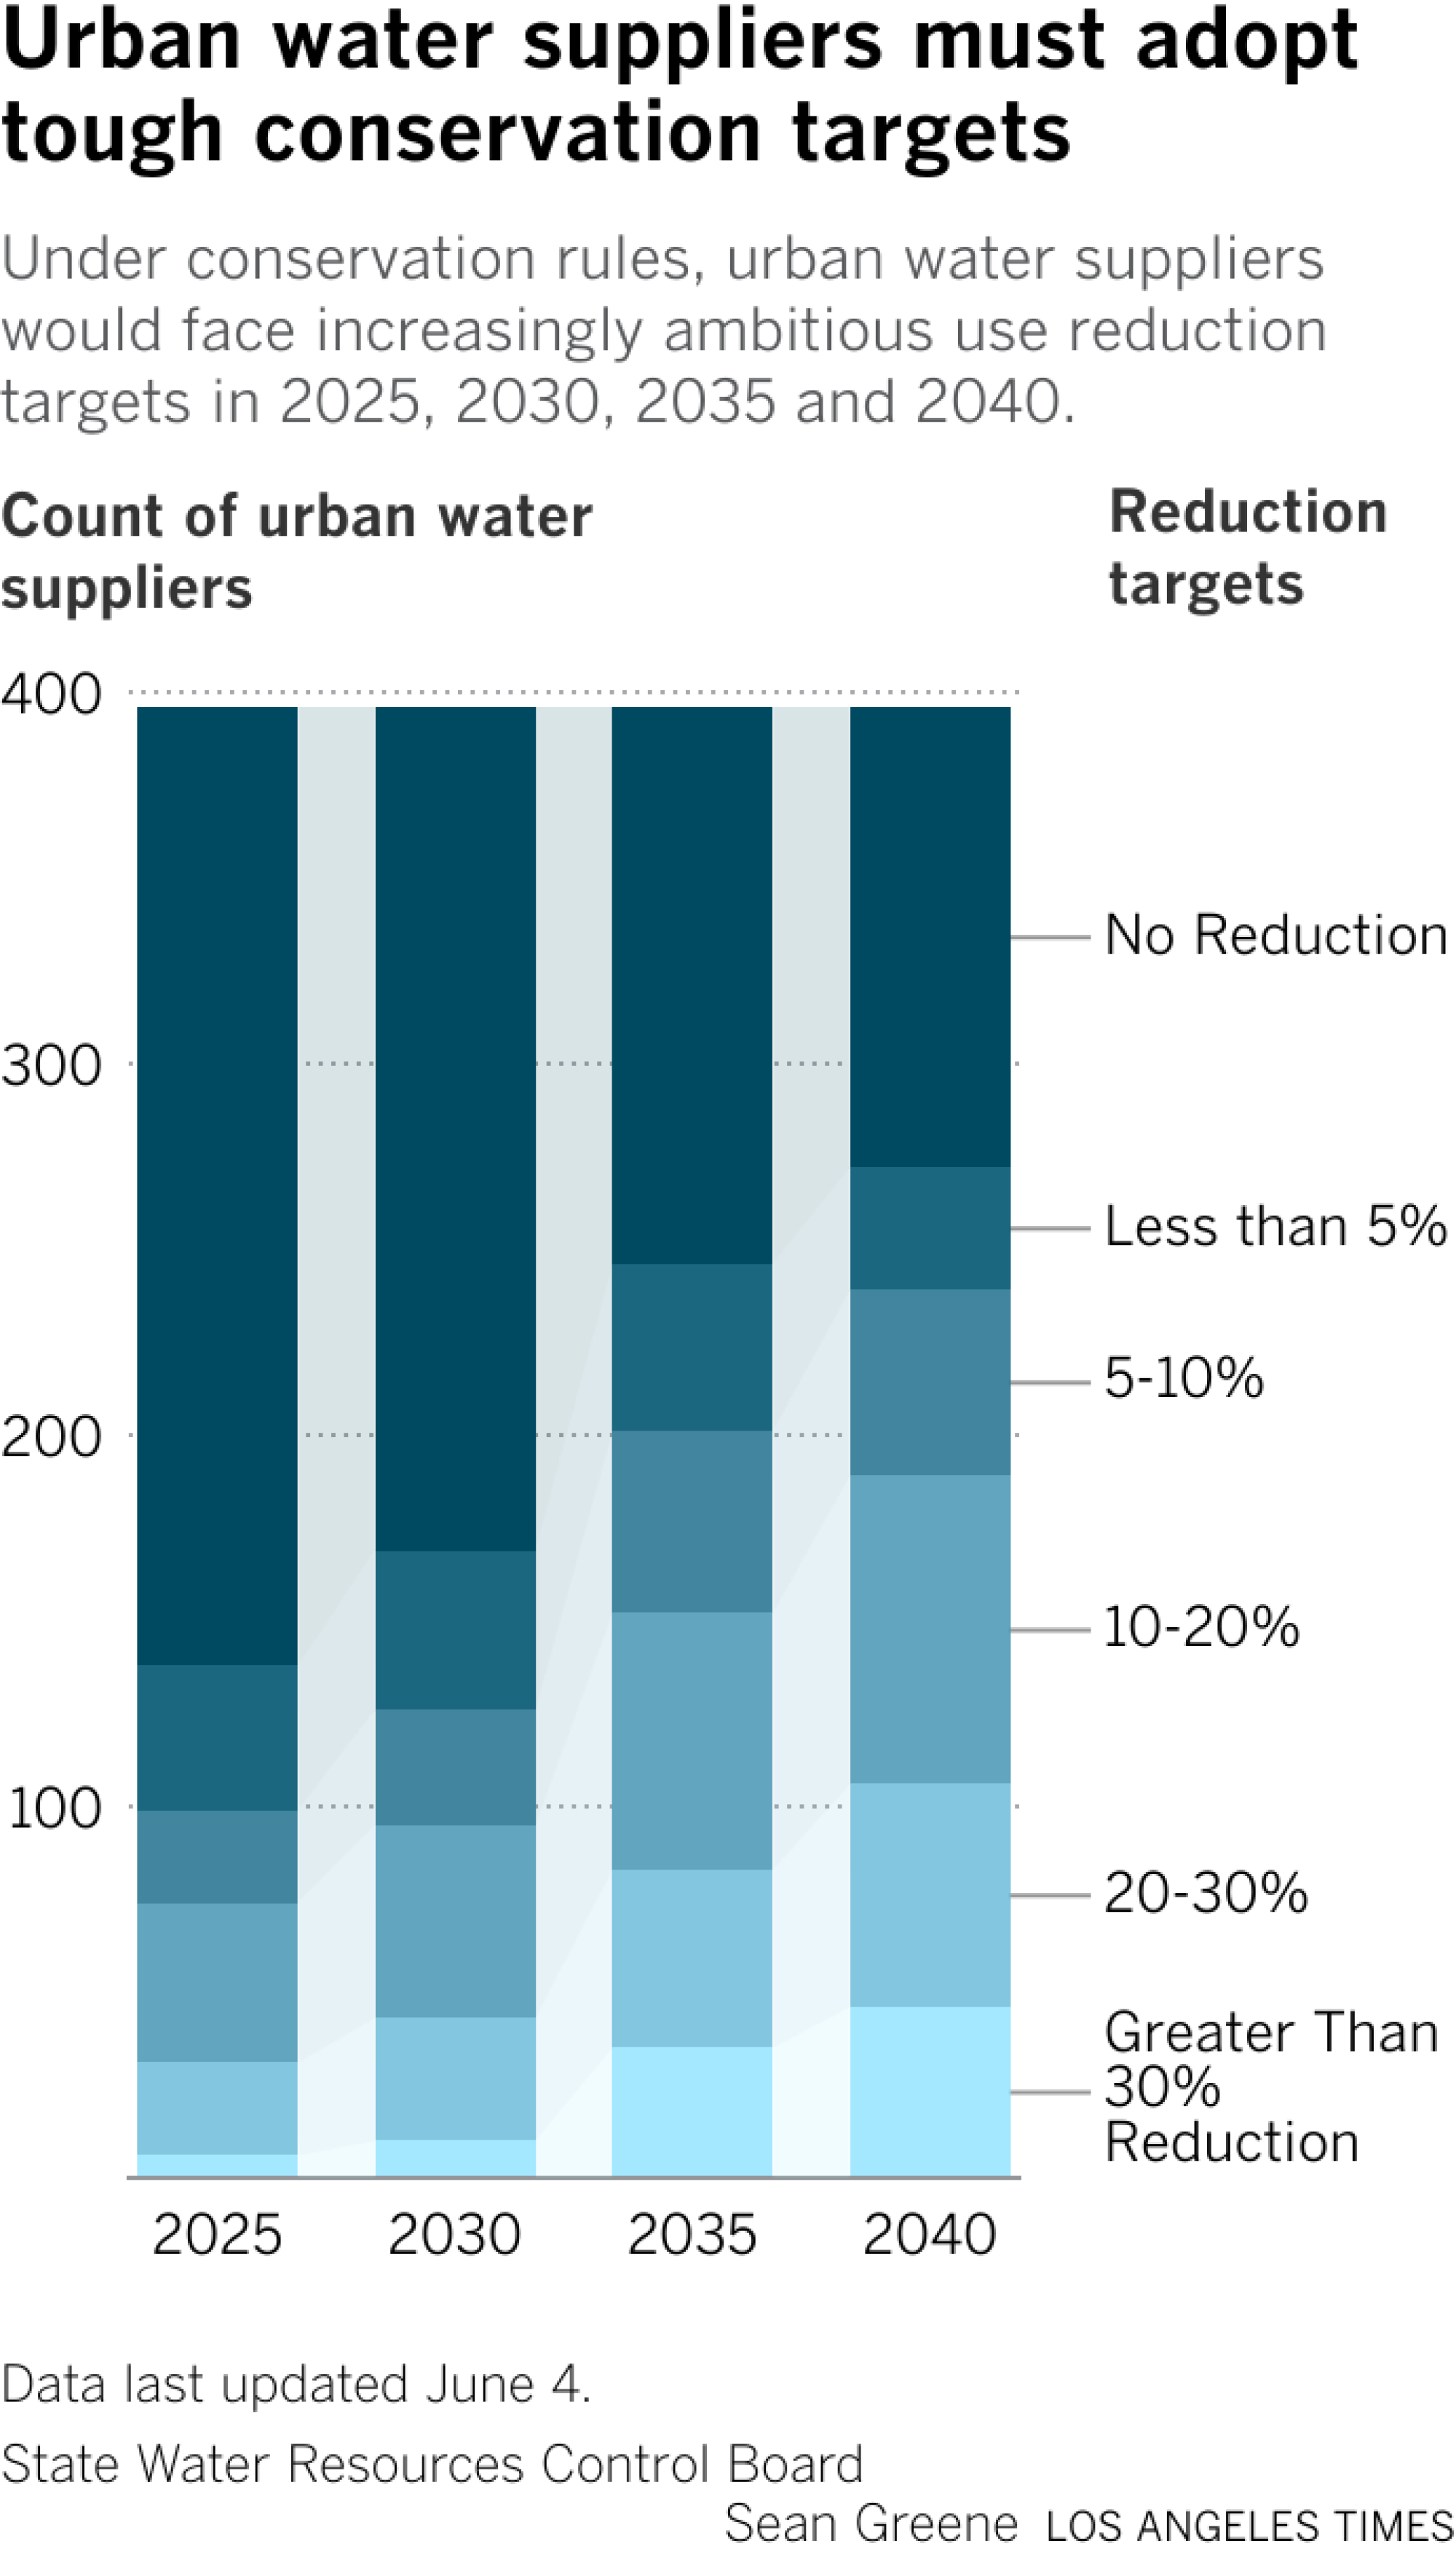 In 2025, most urban water suppliers will not have to cut their water use, while 6 will have to cut by more than 30%. By 2040, almost 60% of suppliers will have to cut water use by 5% or more.